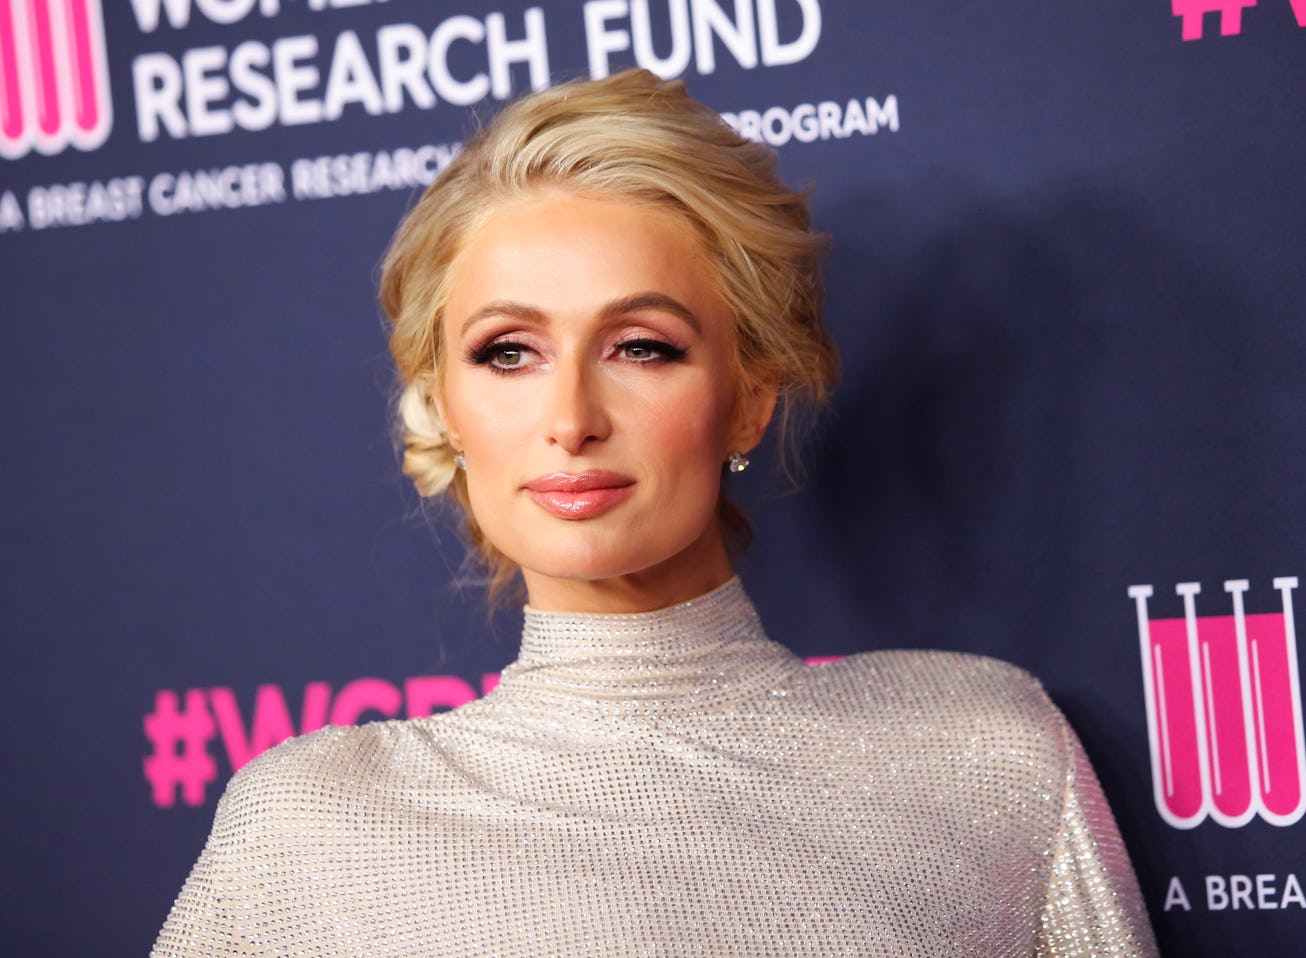 Paris Hilton testified against Provo Canyon, her former boarding school, in a Utah court.